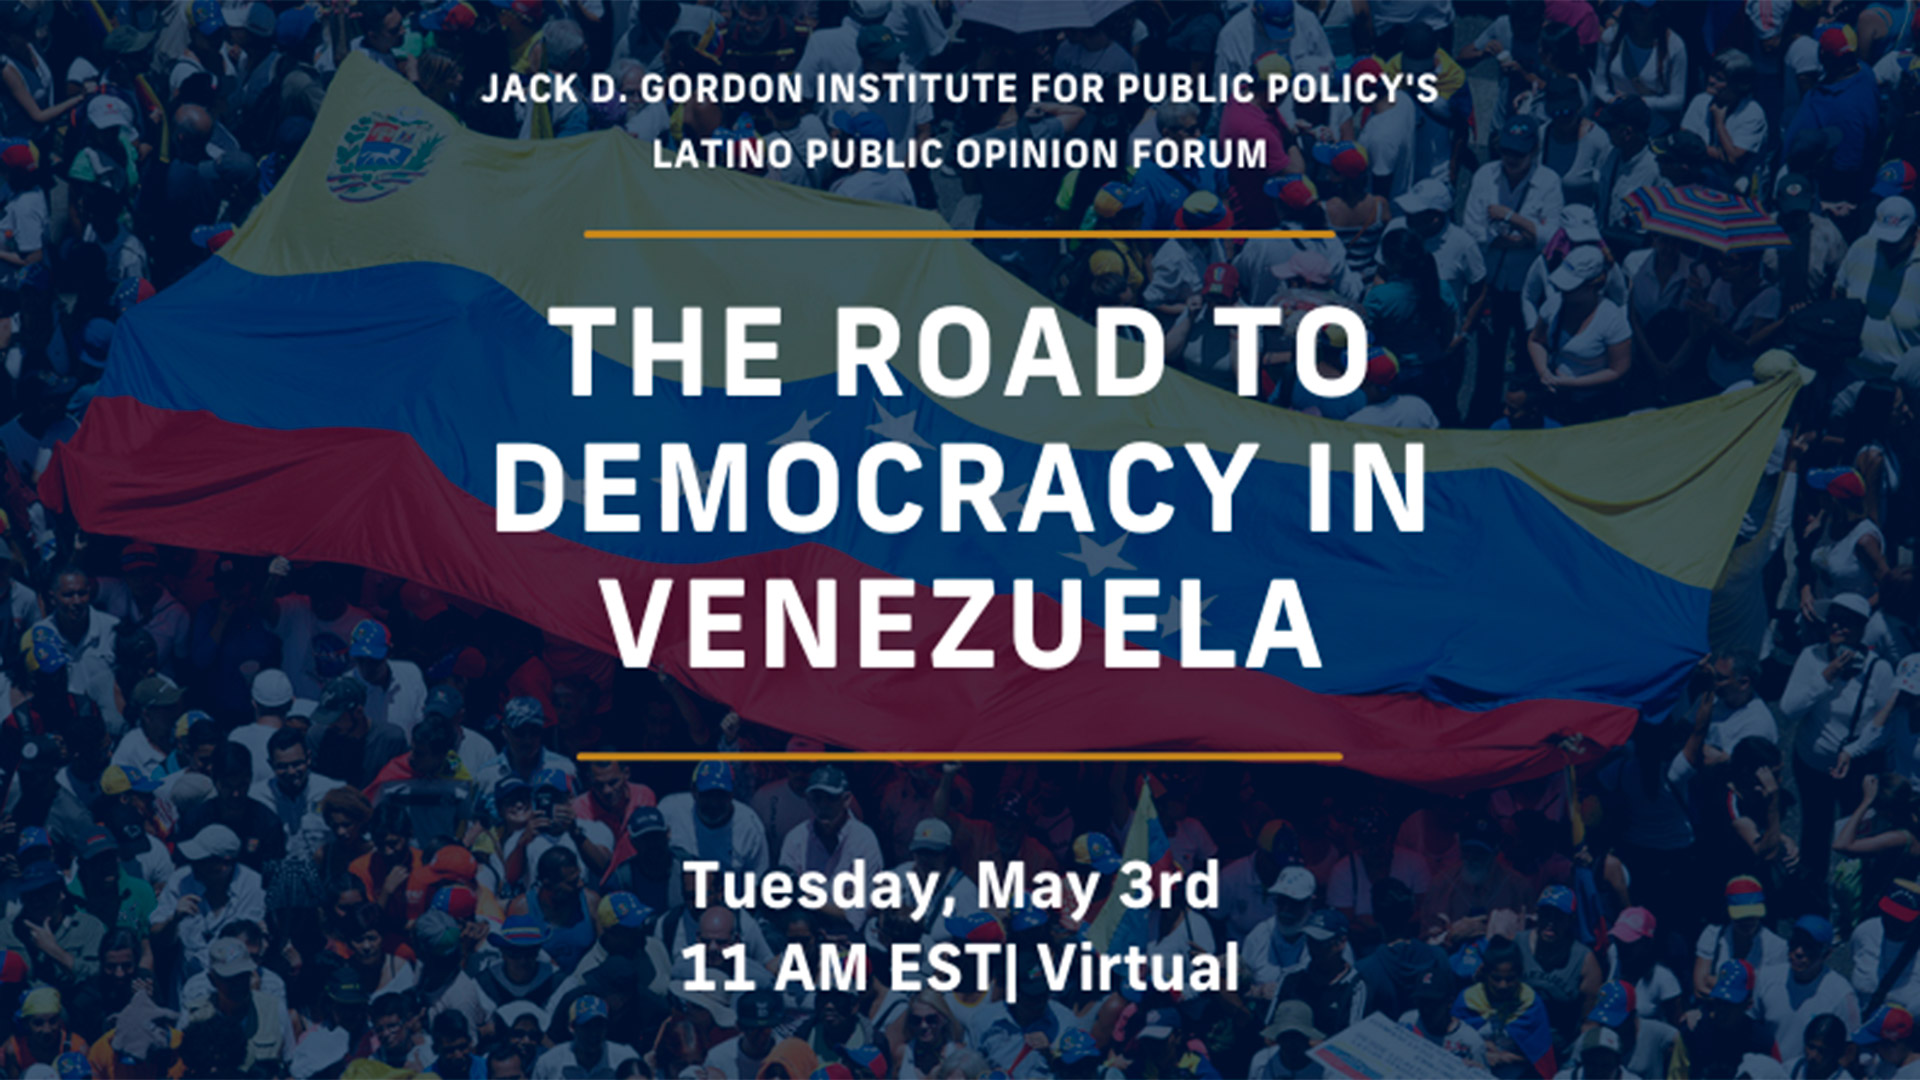 One of the panels will be dedicated to the crisis in Venezuela